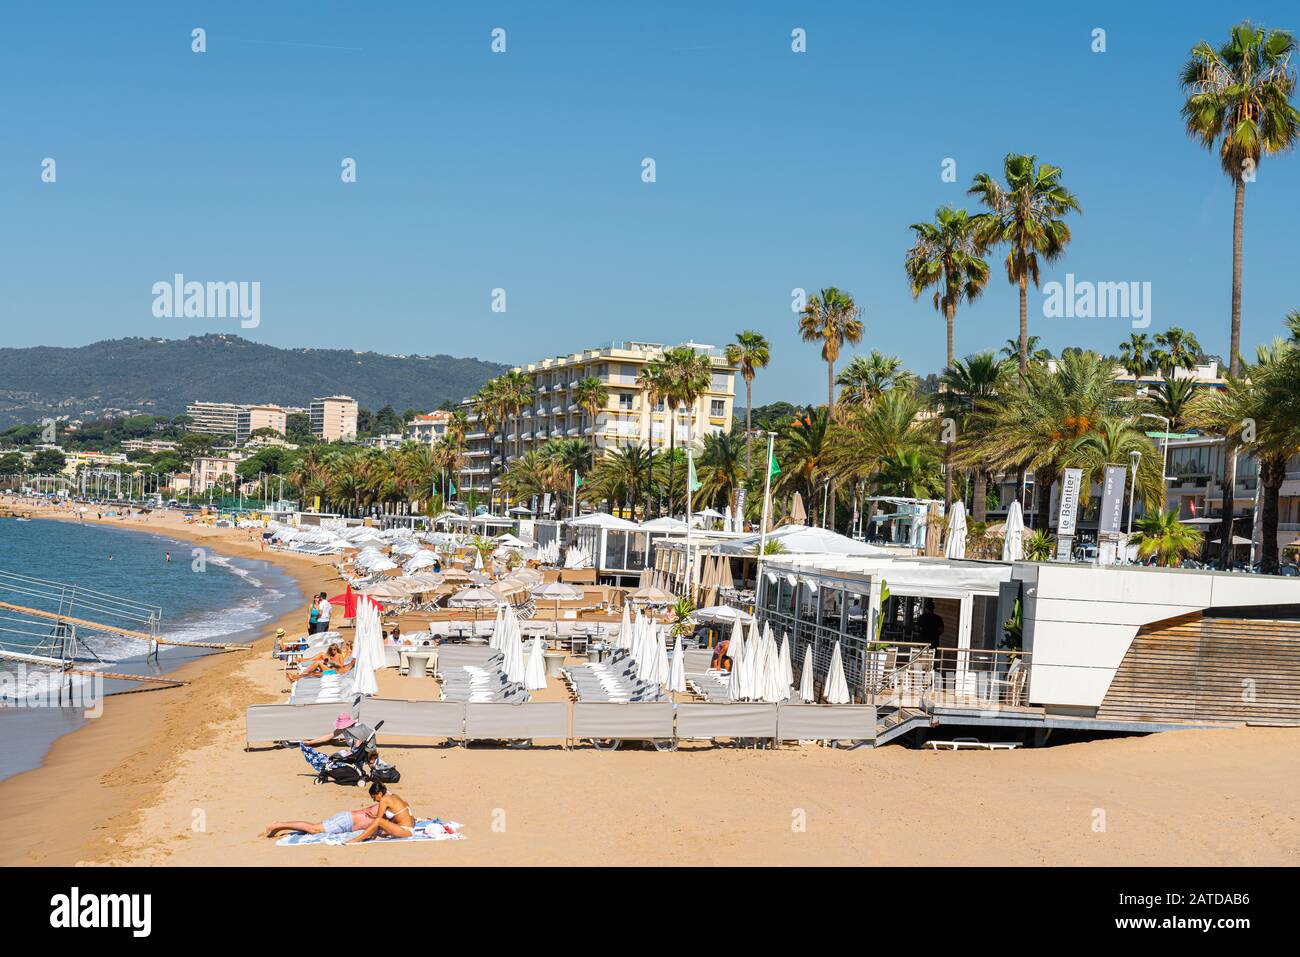 CANNES, FRANCE - JUNE 01, 2019: People Having Fun On Cannes City Beach At The Mediterranean Sea Stock Photo